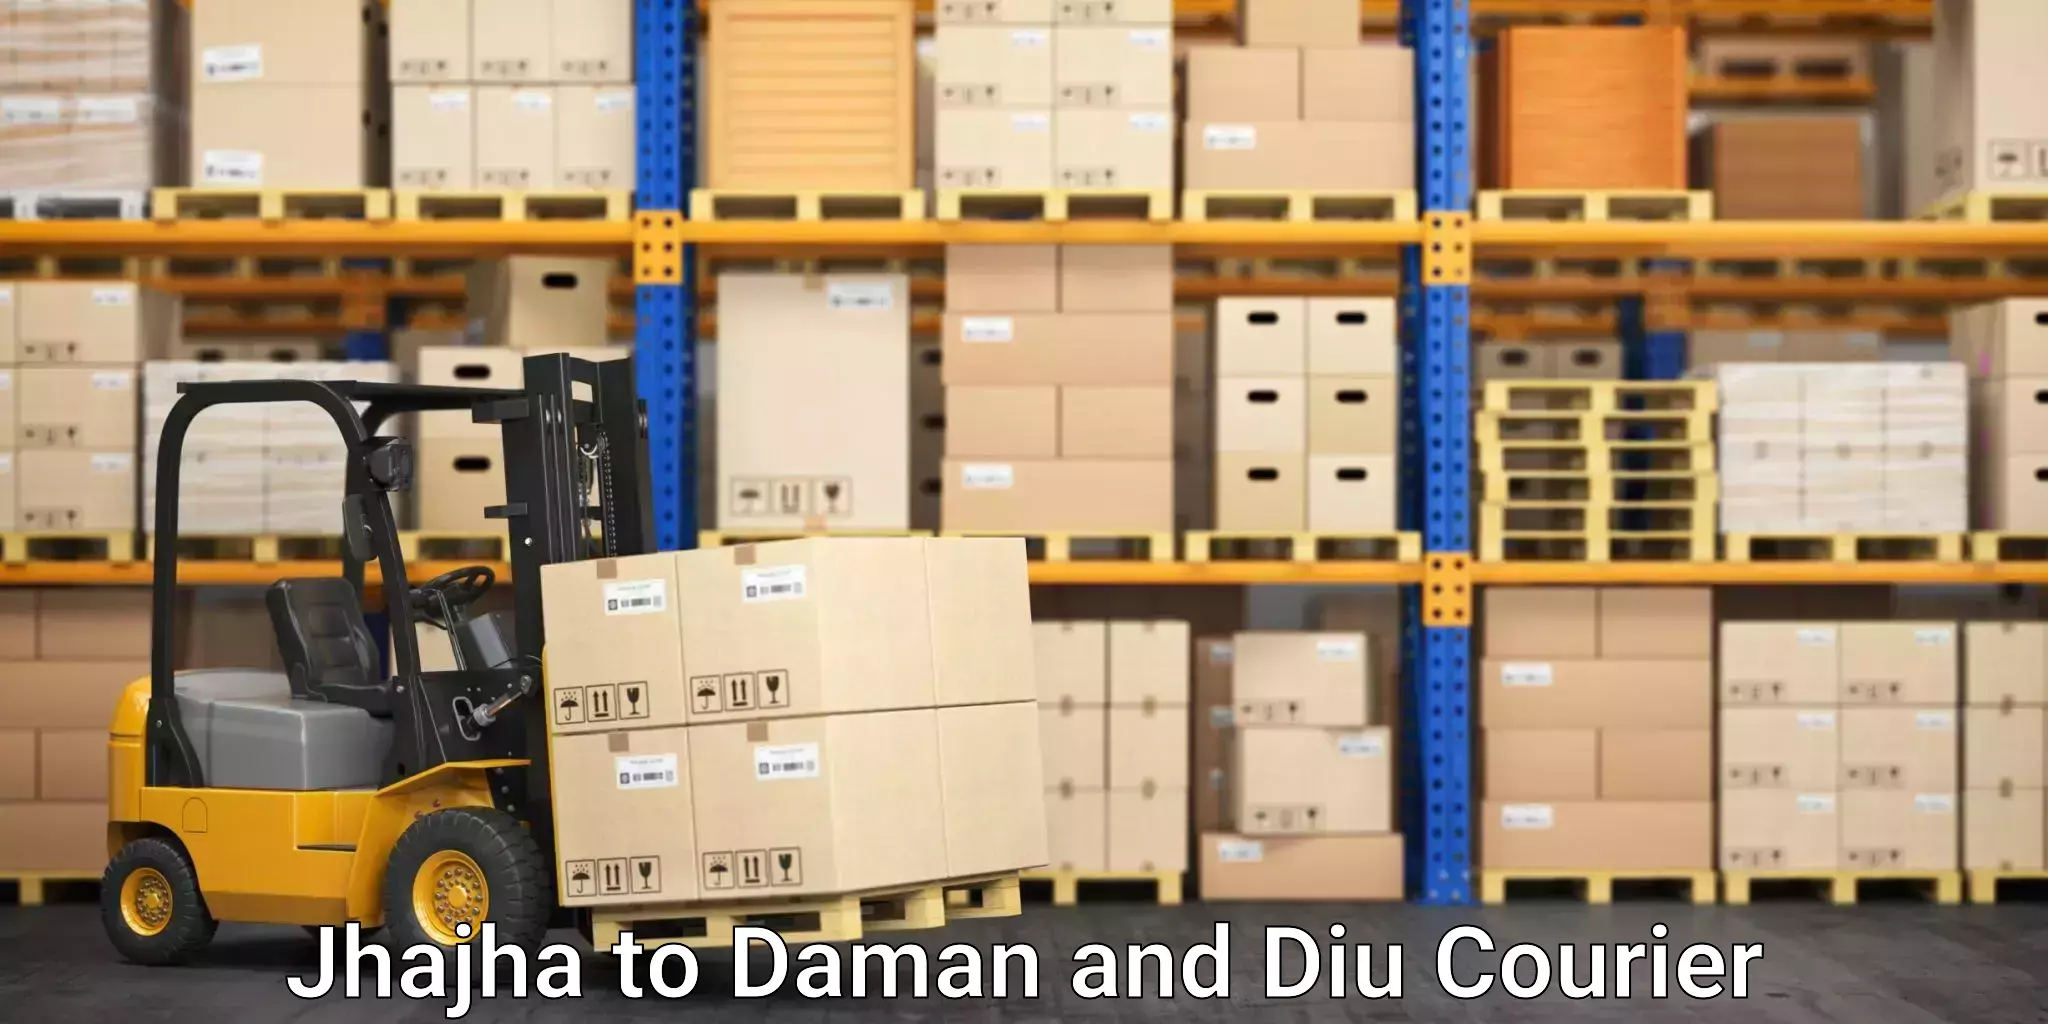 Furniture movers and packers Jhajha to Daman and Diu